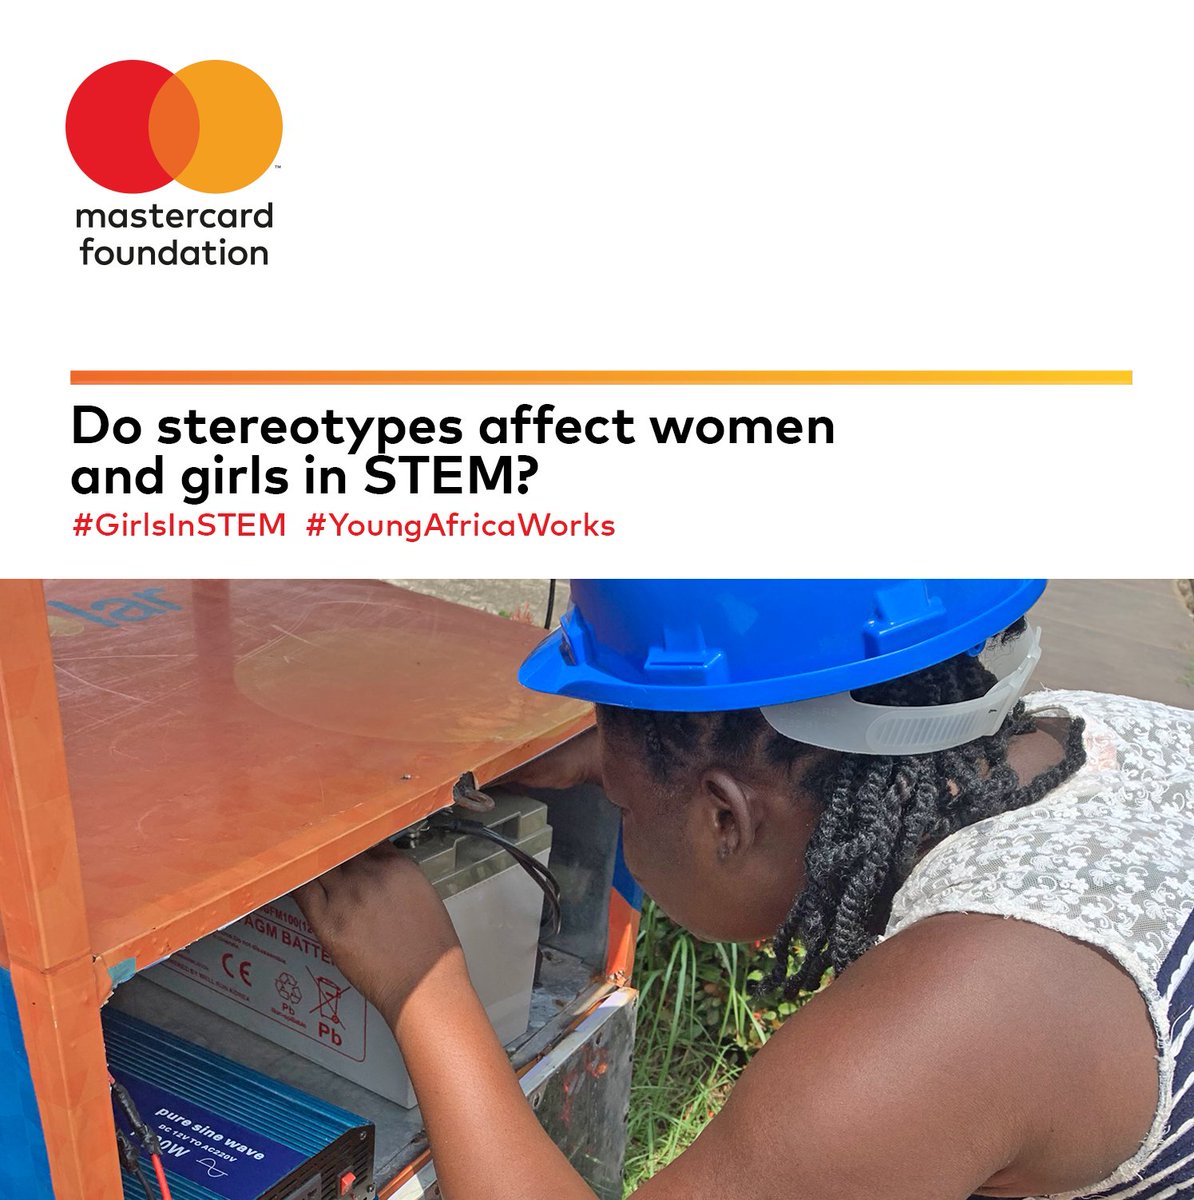 Do you think societal stereotypes often hinder women scientists' access to vital resources like research funding, mentorship opportunities, and transformative internships? ​ What can be done to overcome these stereotypes? Let's discuss​ ​ #YoungAfricaWorks #GirlsInSTEM